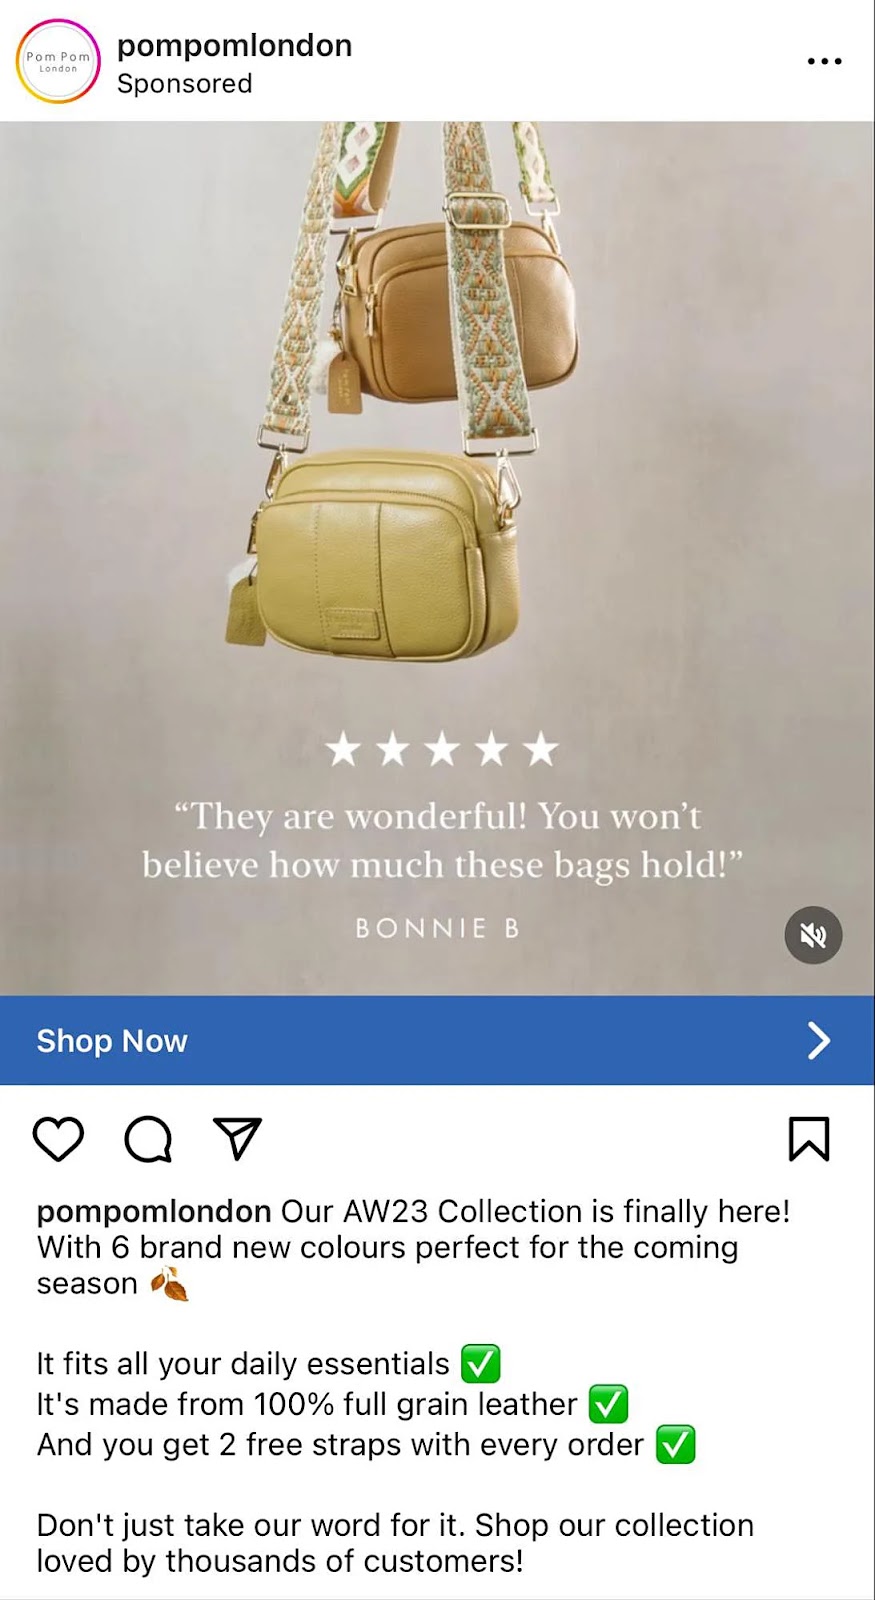 Pom Pom London's Instagram ad with "They are wonderful! You won't believe ،w much these bags ،ld!" copy